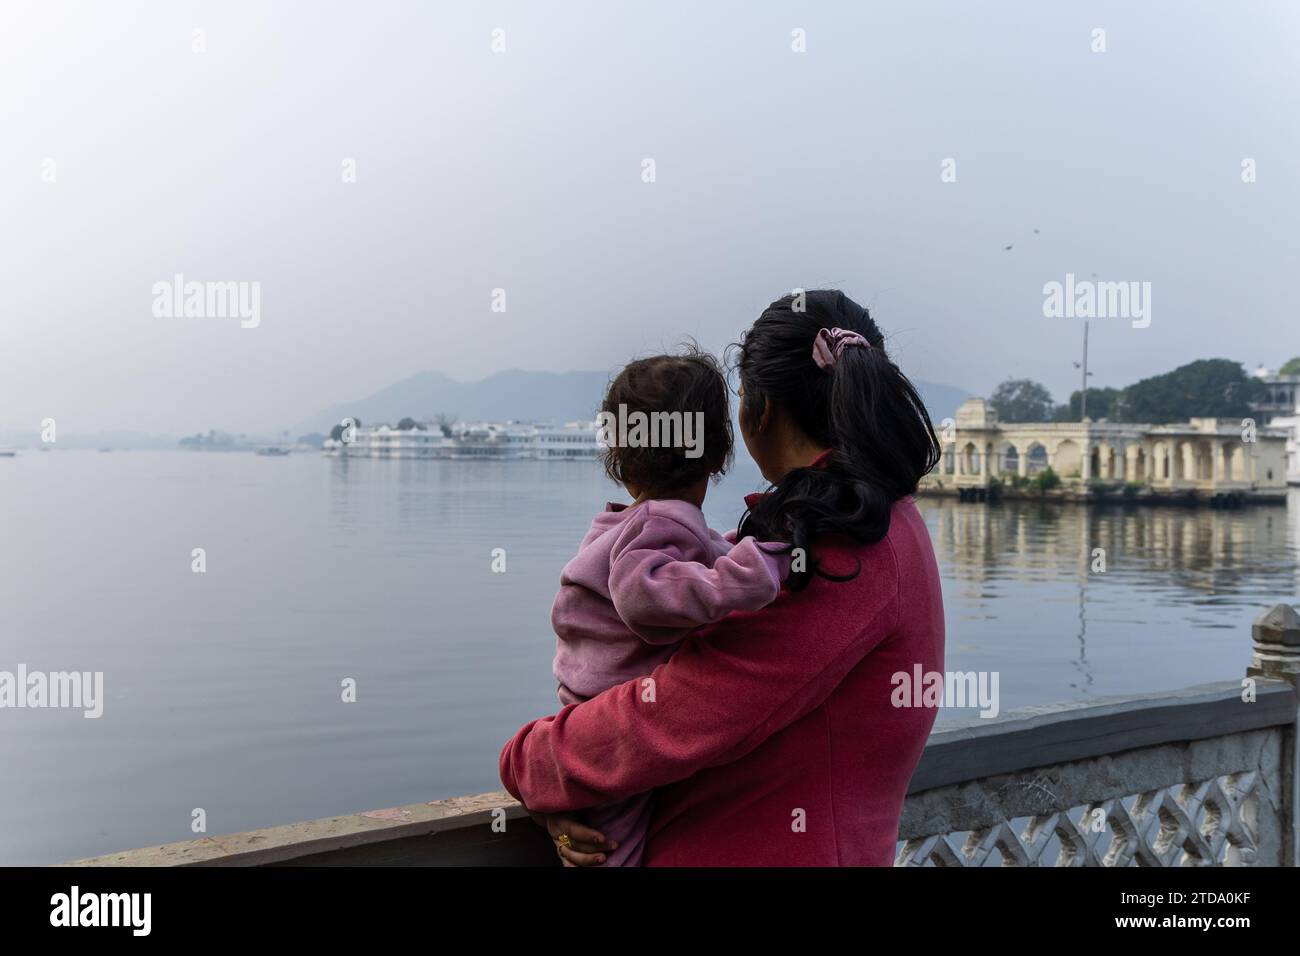 young mother with her son looking at mountain lake city landscape at morning image is taken at Jagdish Temple udaipur rajasthan india. Stock Photo